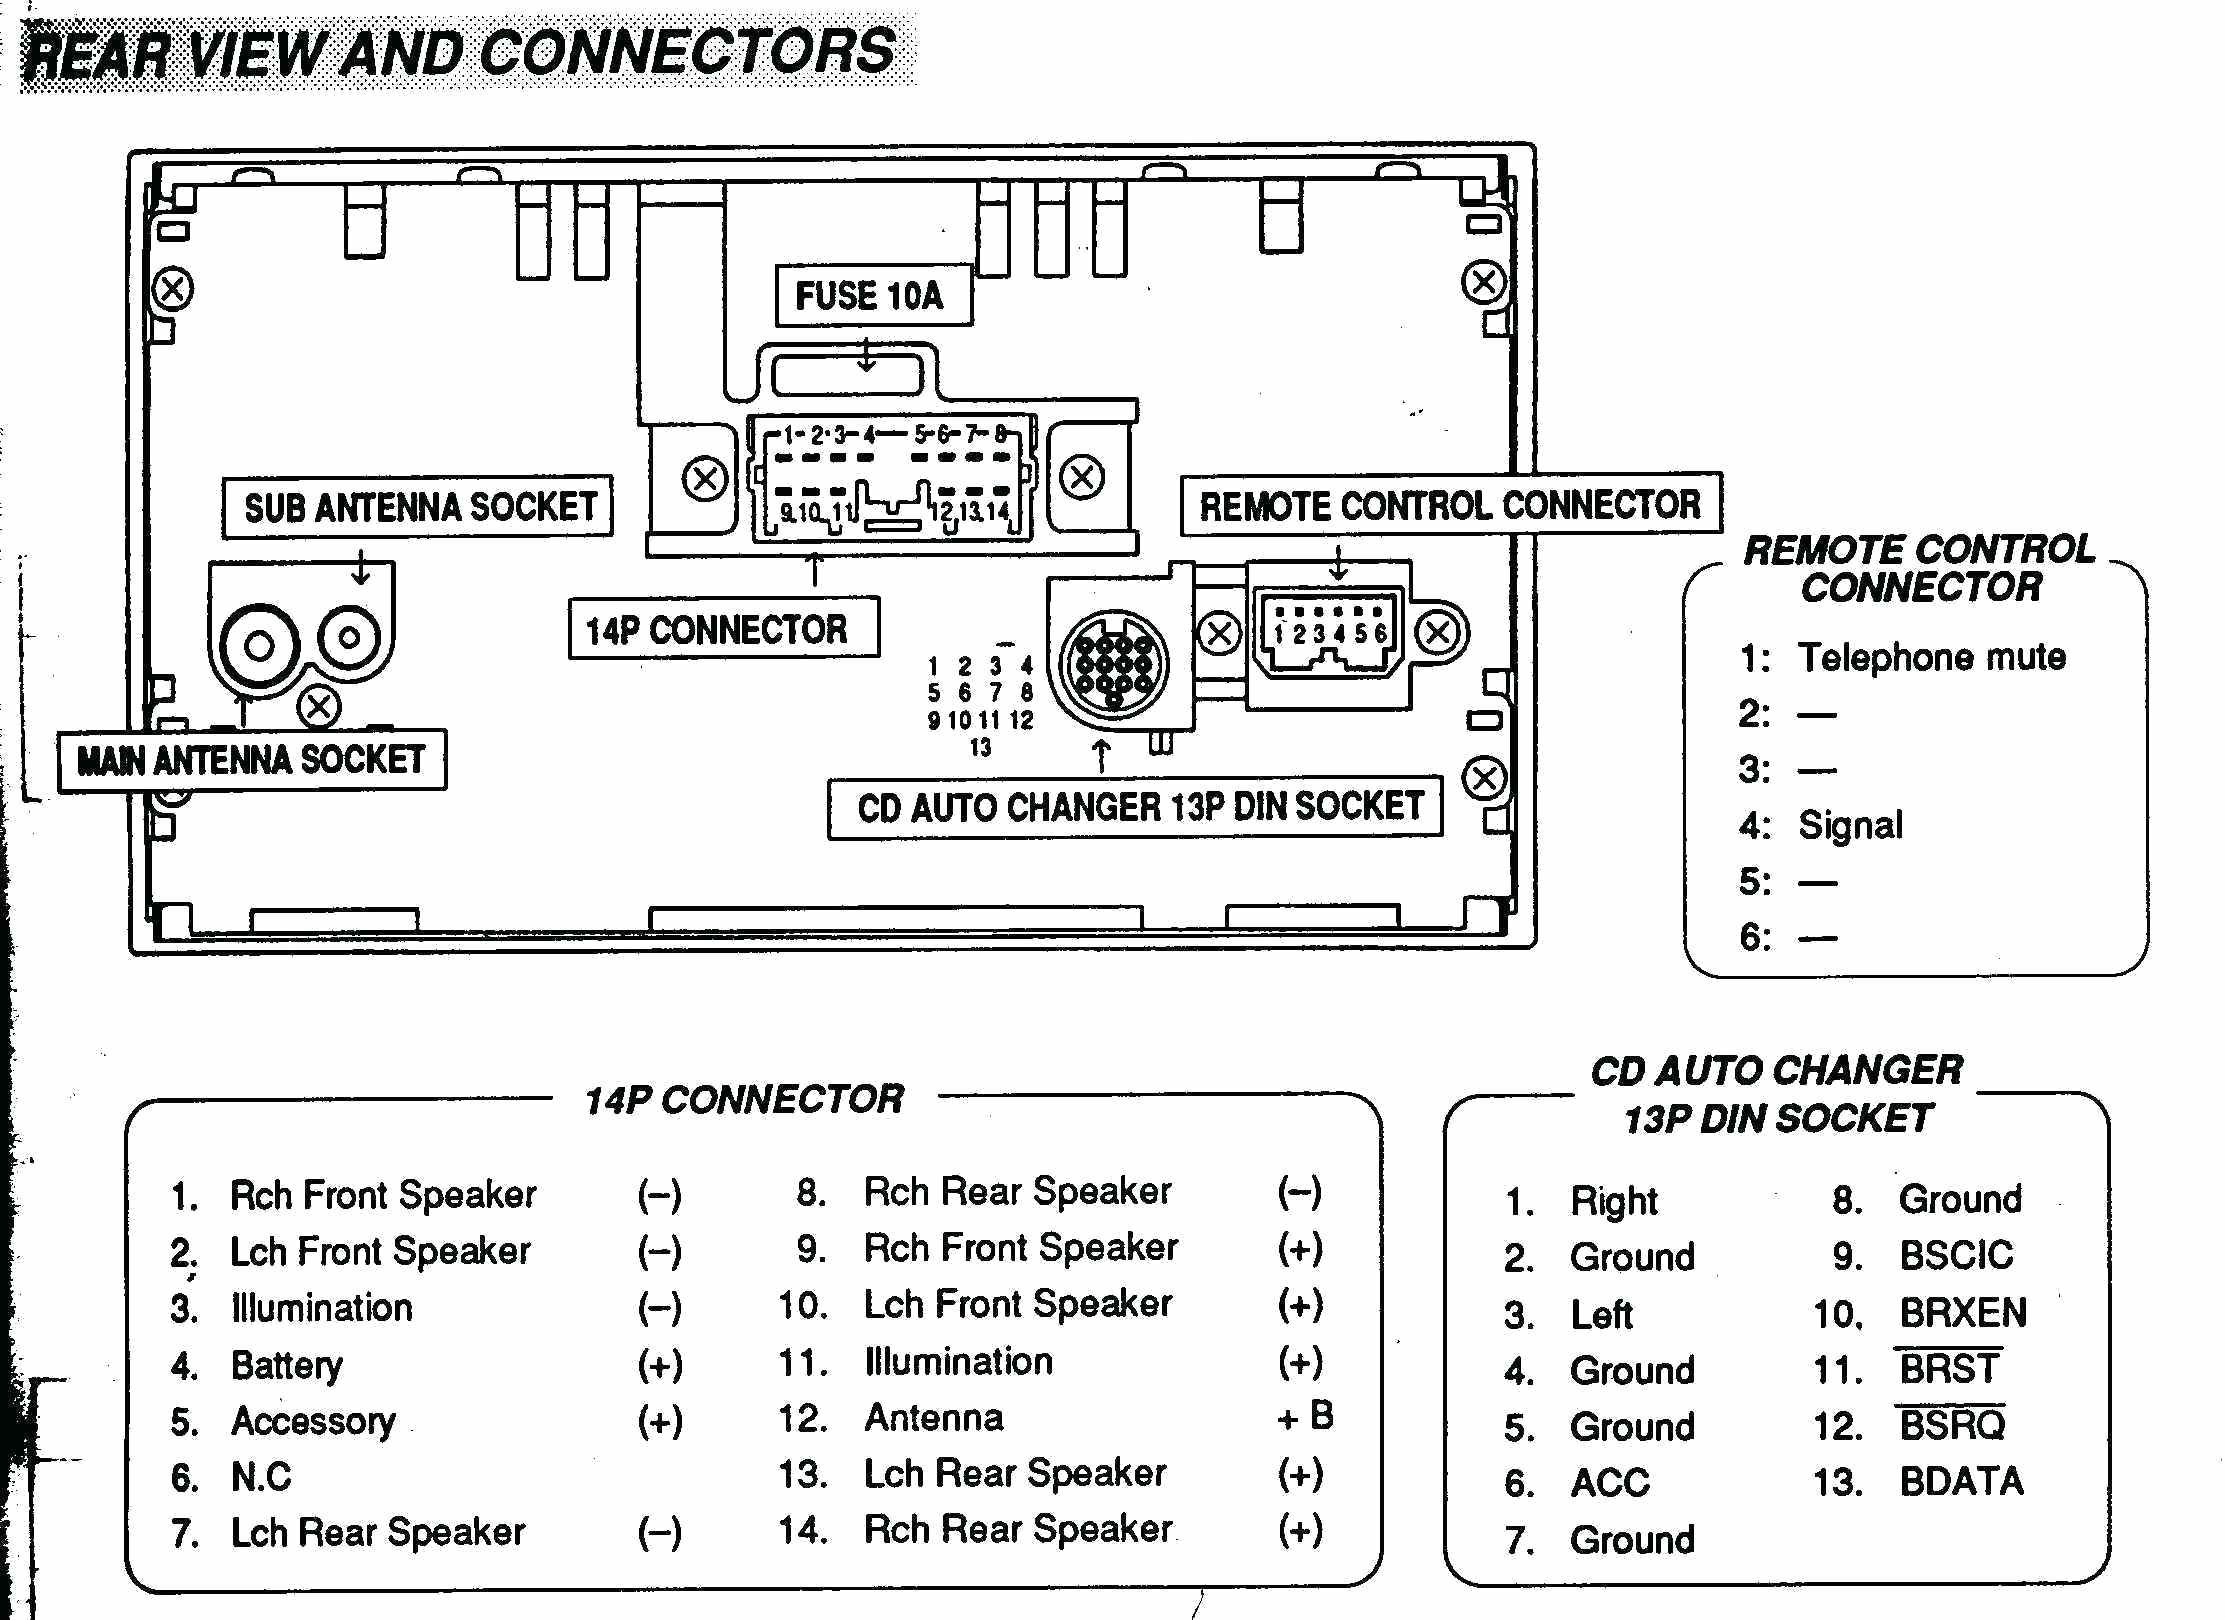 1998 Toyota Avalon Stereo Wiring Diagram from mainetreasurechest.com